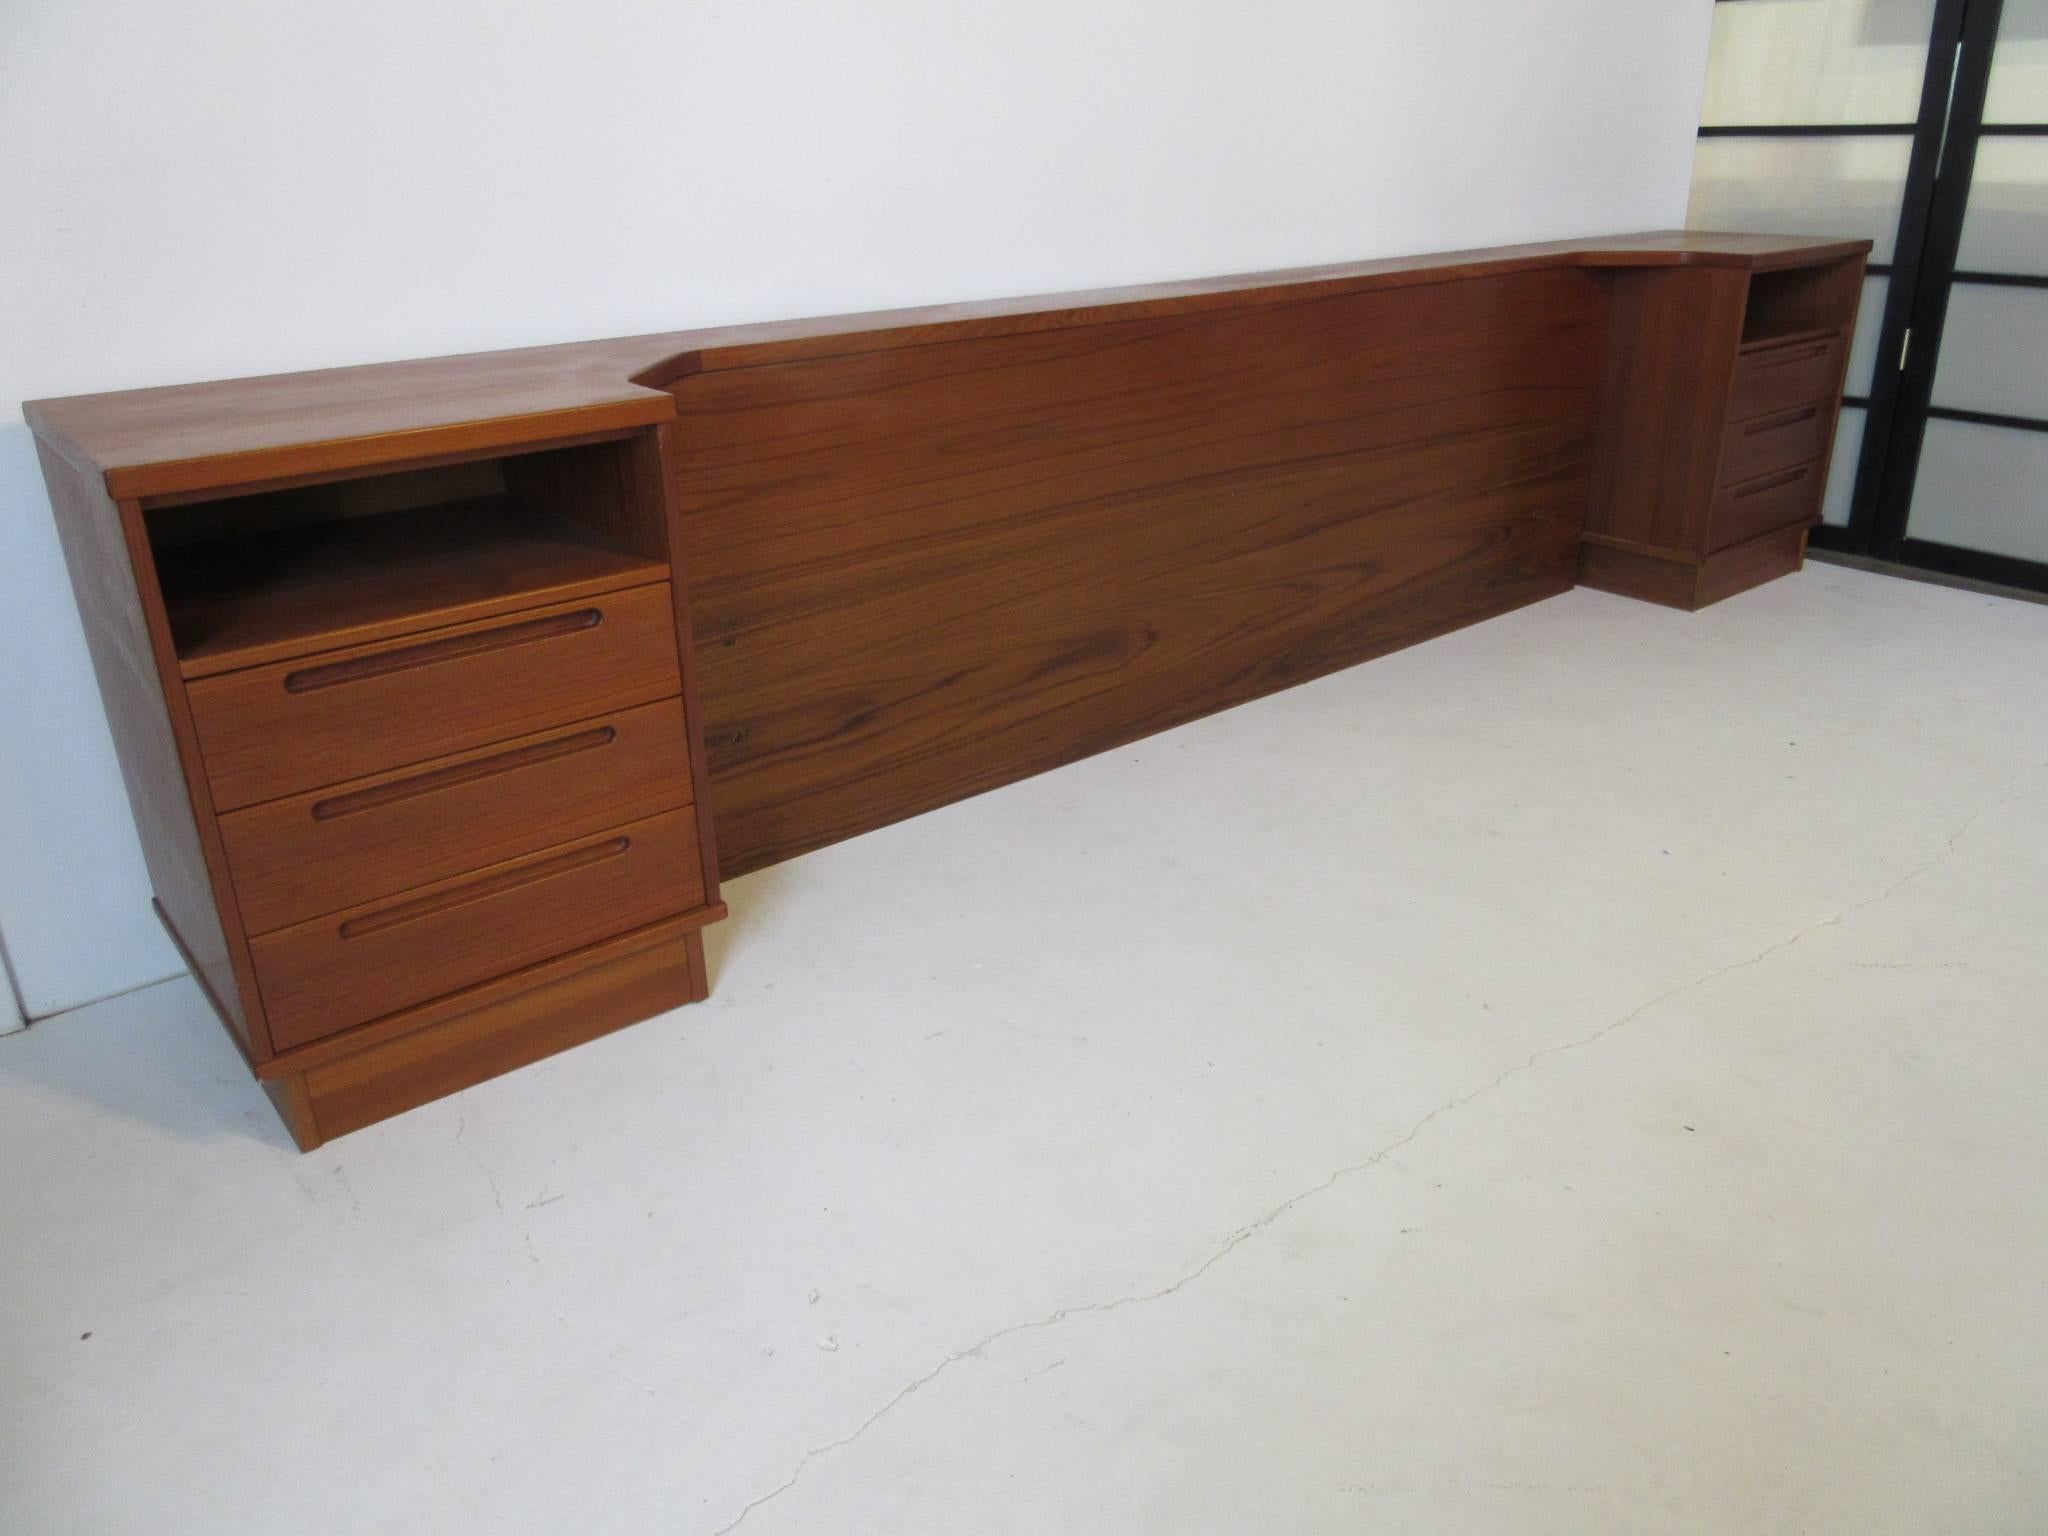 A Danish teak wood king-size platform bed set with built in nightstands, three drawers to each side and a built in headboard also two large storage drawers that are on each side of the lower platform. The whole thing comes apart and can be easily